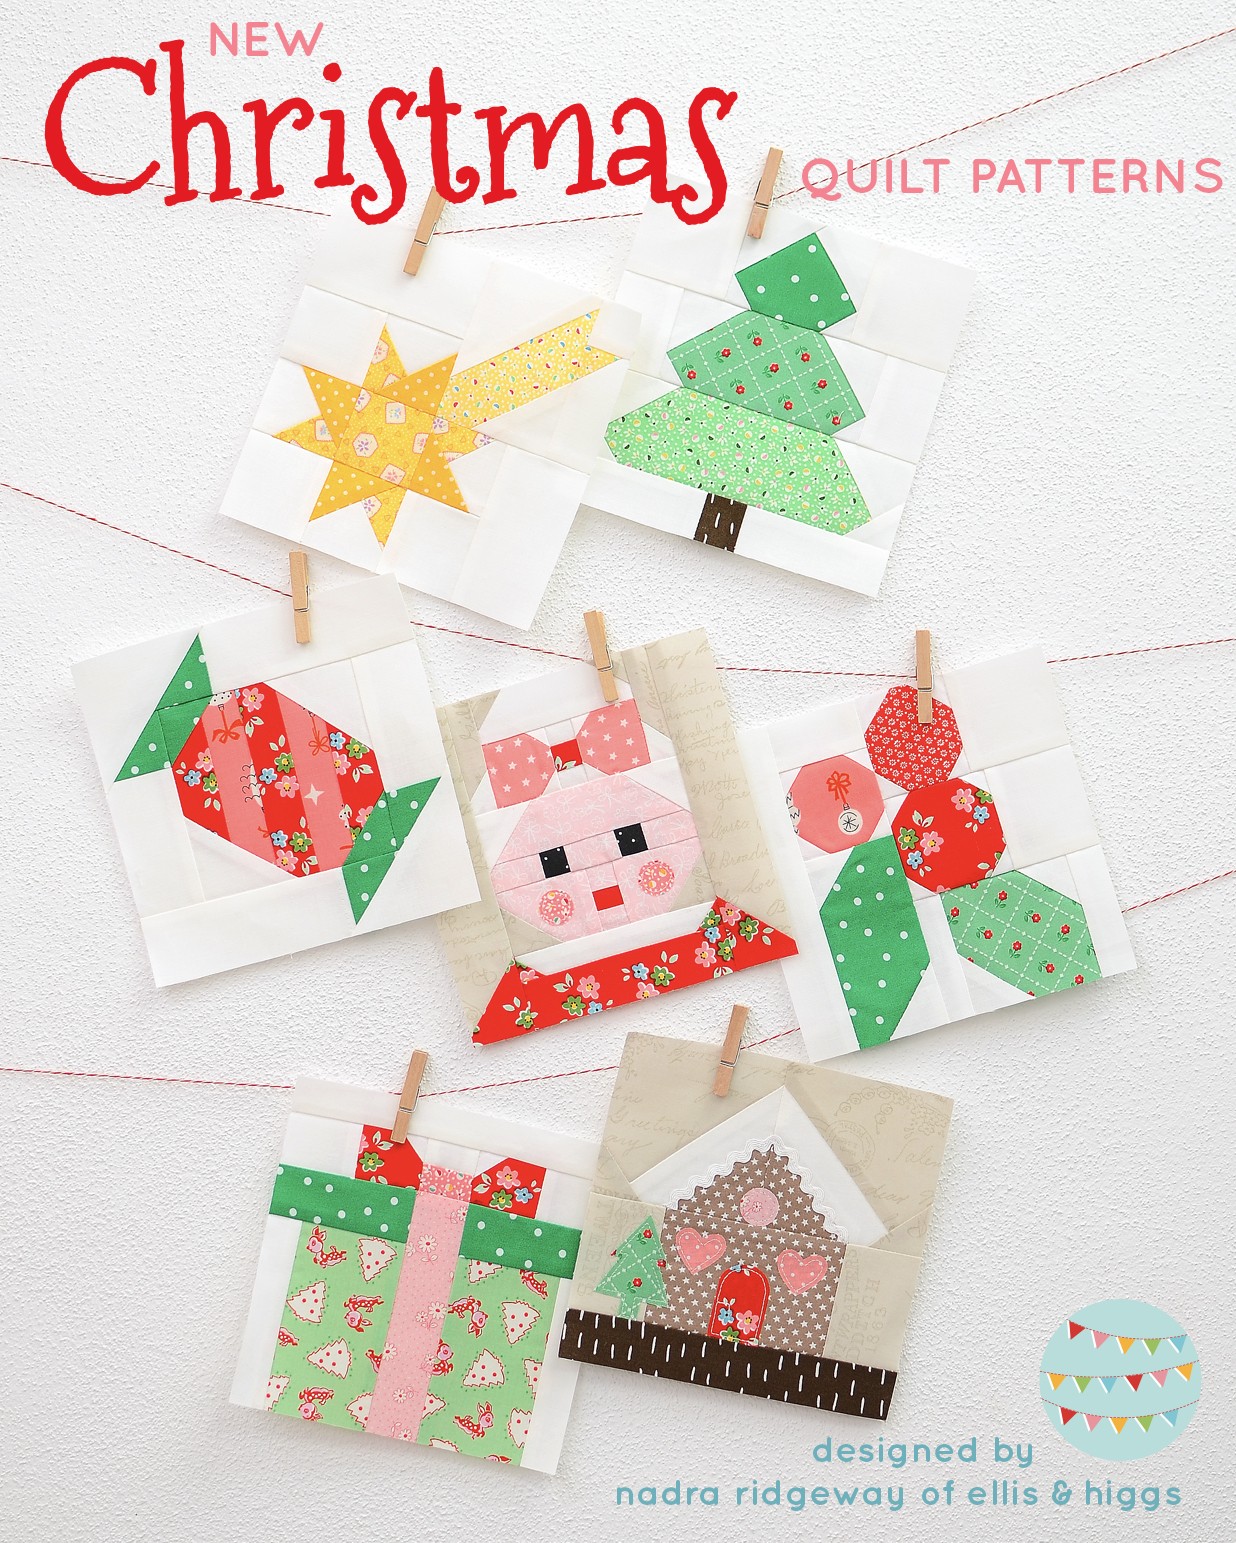 Christmas quilt patterns - Christmas quilt blocks hanging on the wall